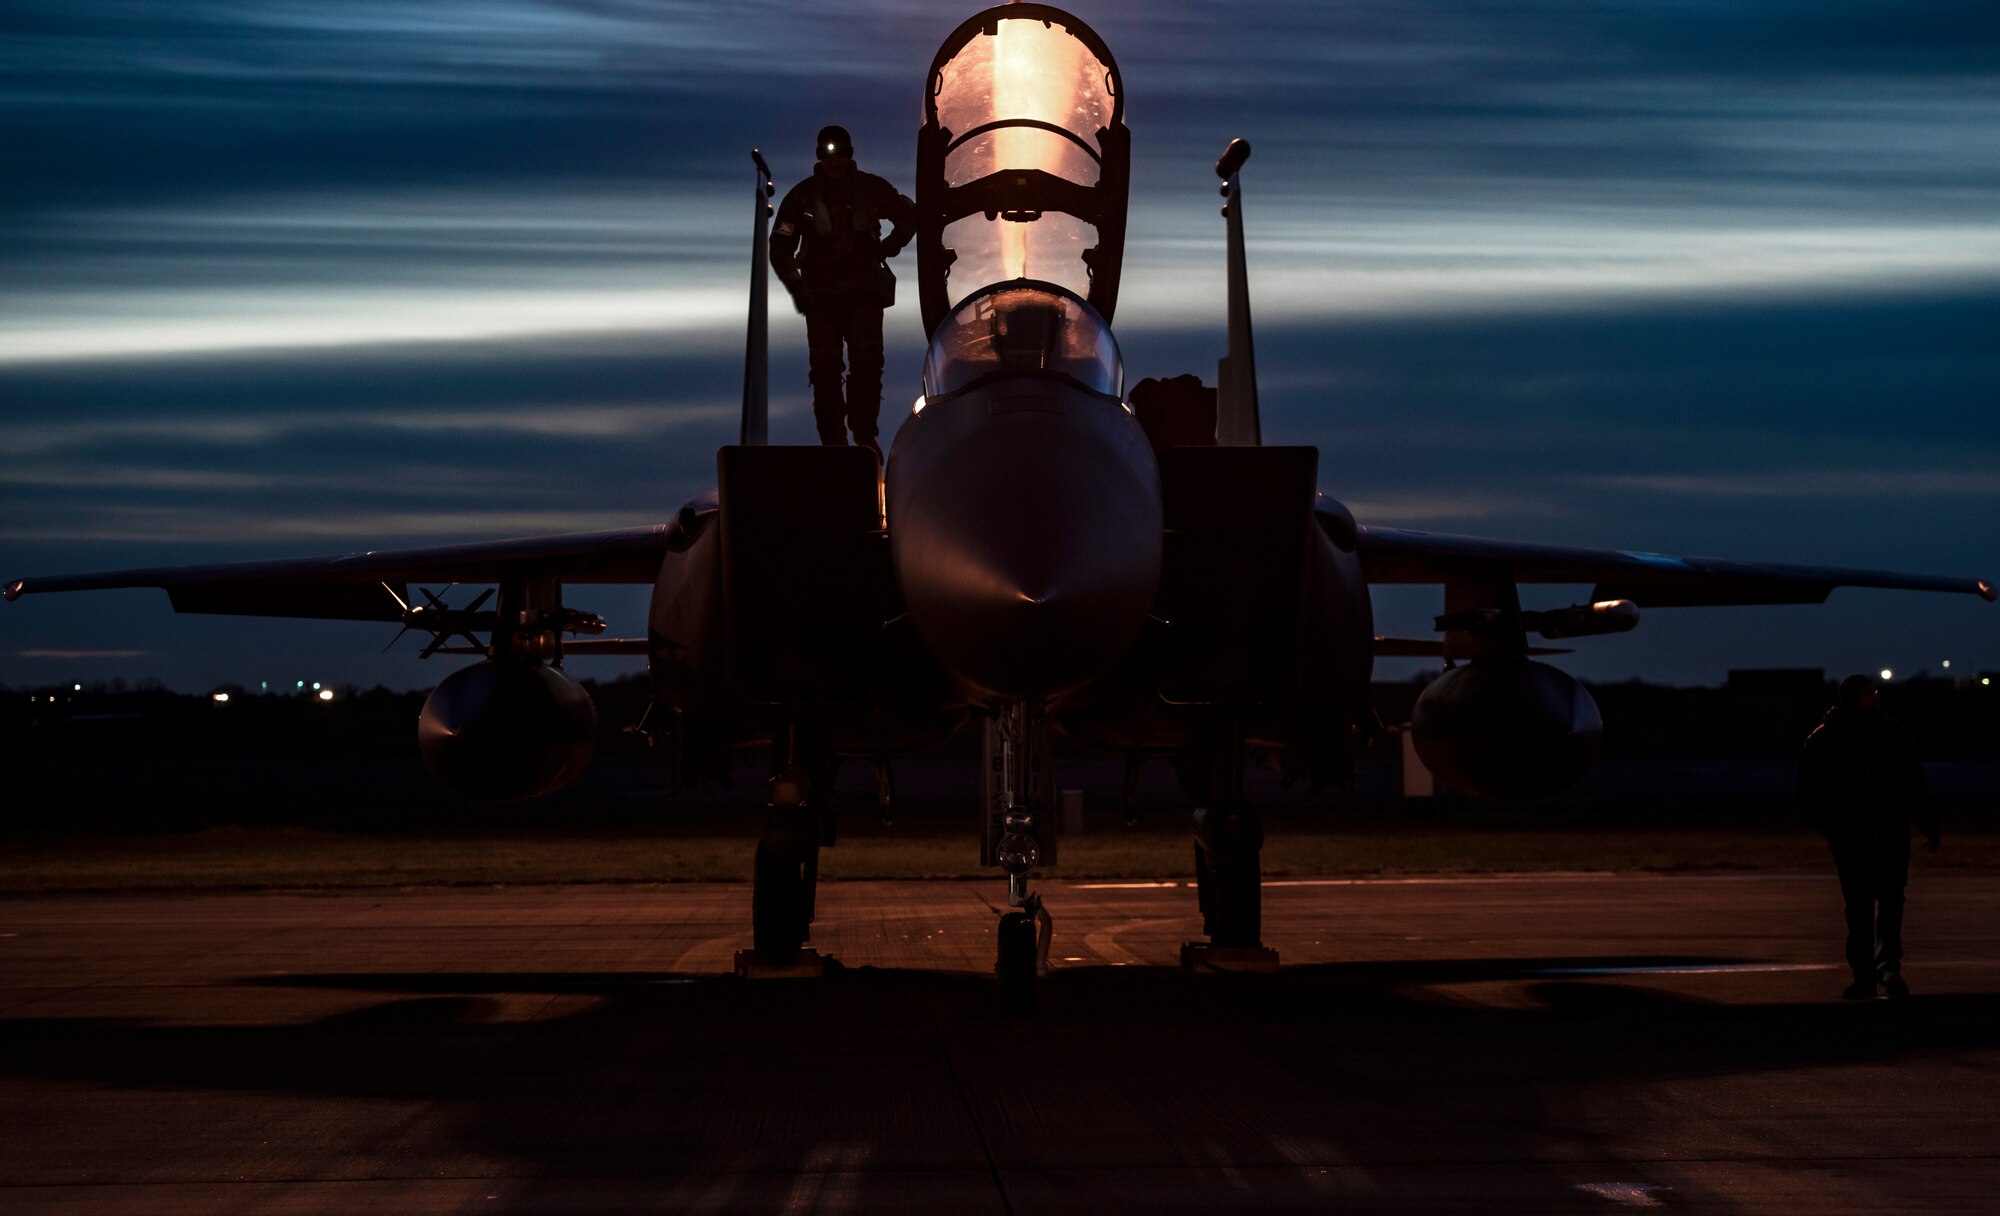 A U.S. Air Force aircrew member assigned to the 492nd Fighter Squadron prepares to enter the cockpit of an F-15E Strike Eagle prior to evening take-offs during Agile Combat Employment training at Royal Air Force Lakenheath, England, Jan. 12, 2021. Training incorporating ACE concepts contribute to the development of multi-capable Airmen and aircrew, improving interoperability and helping allies and partners increase their capabilities in less than optimal environments. (U.S. Air Force photo by Airman 1st Class Jessi Monte)